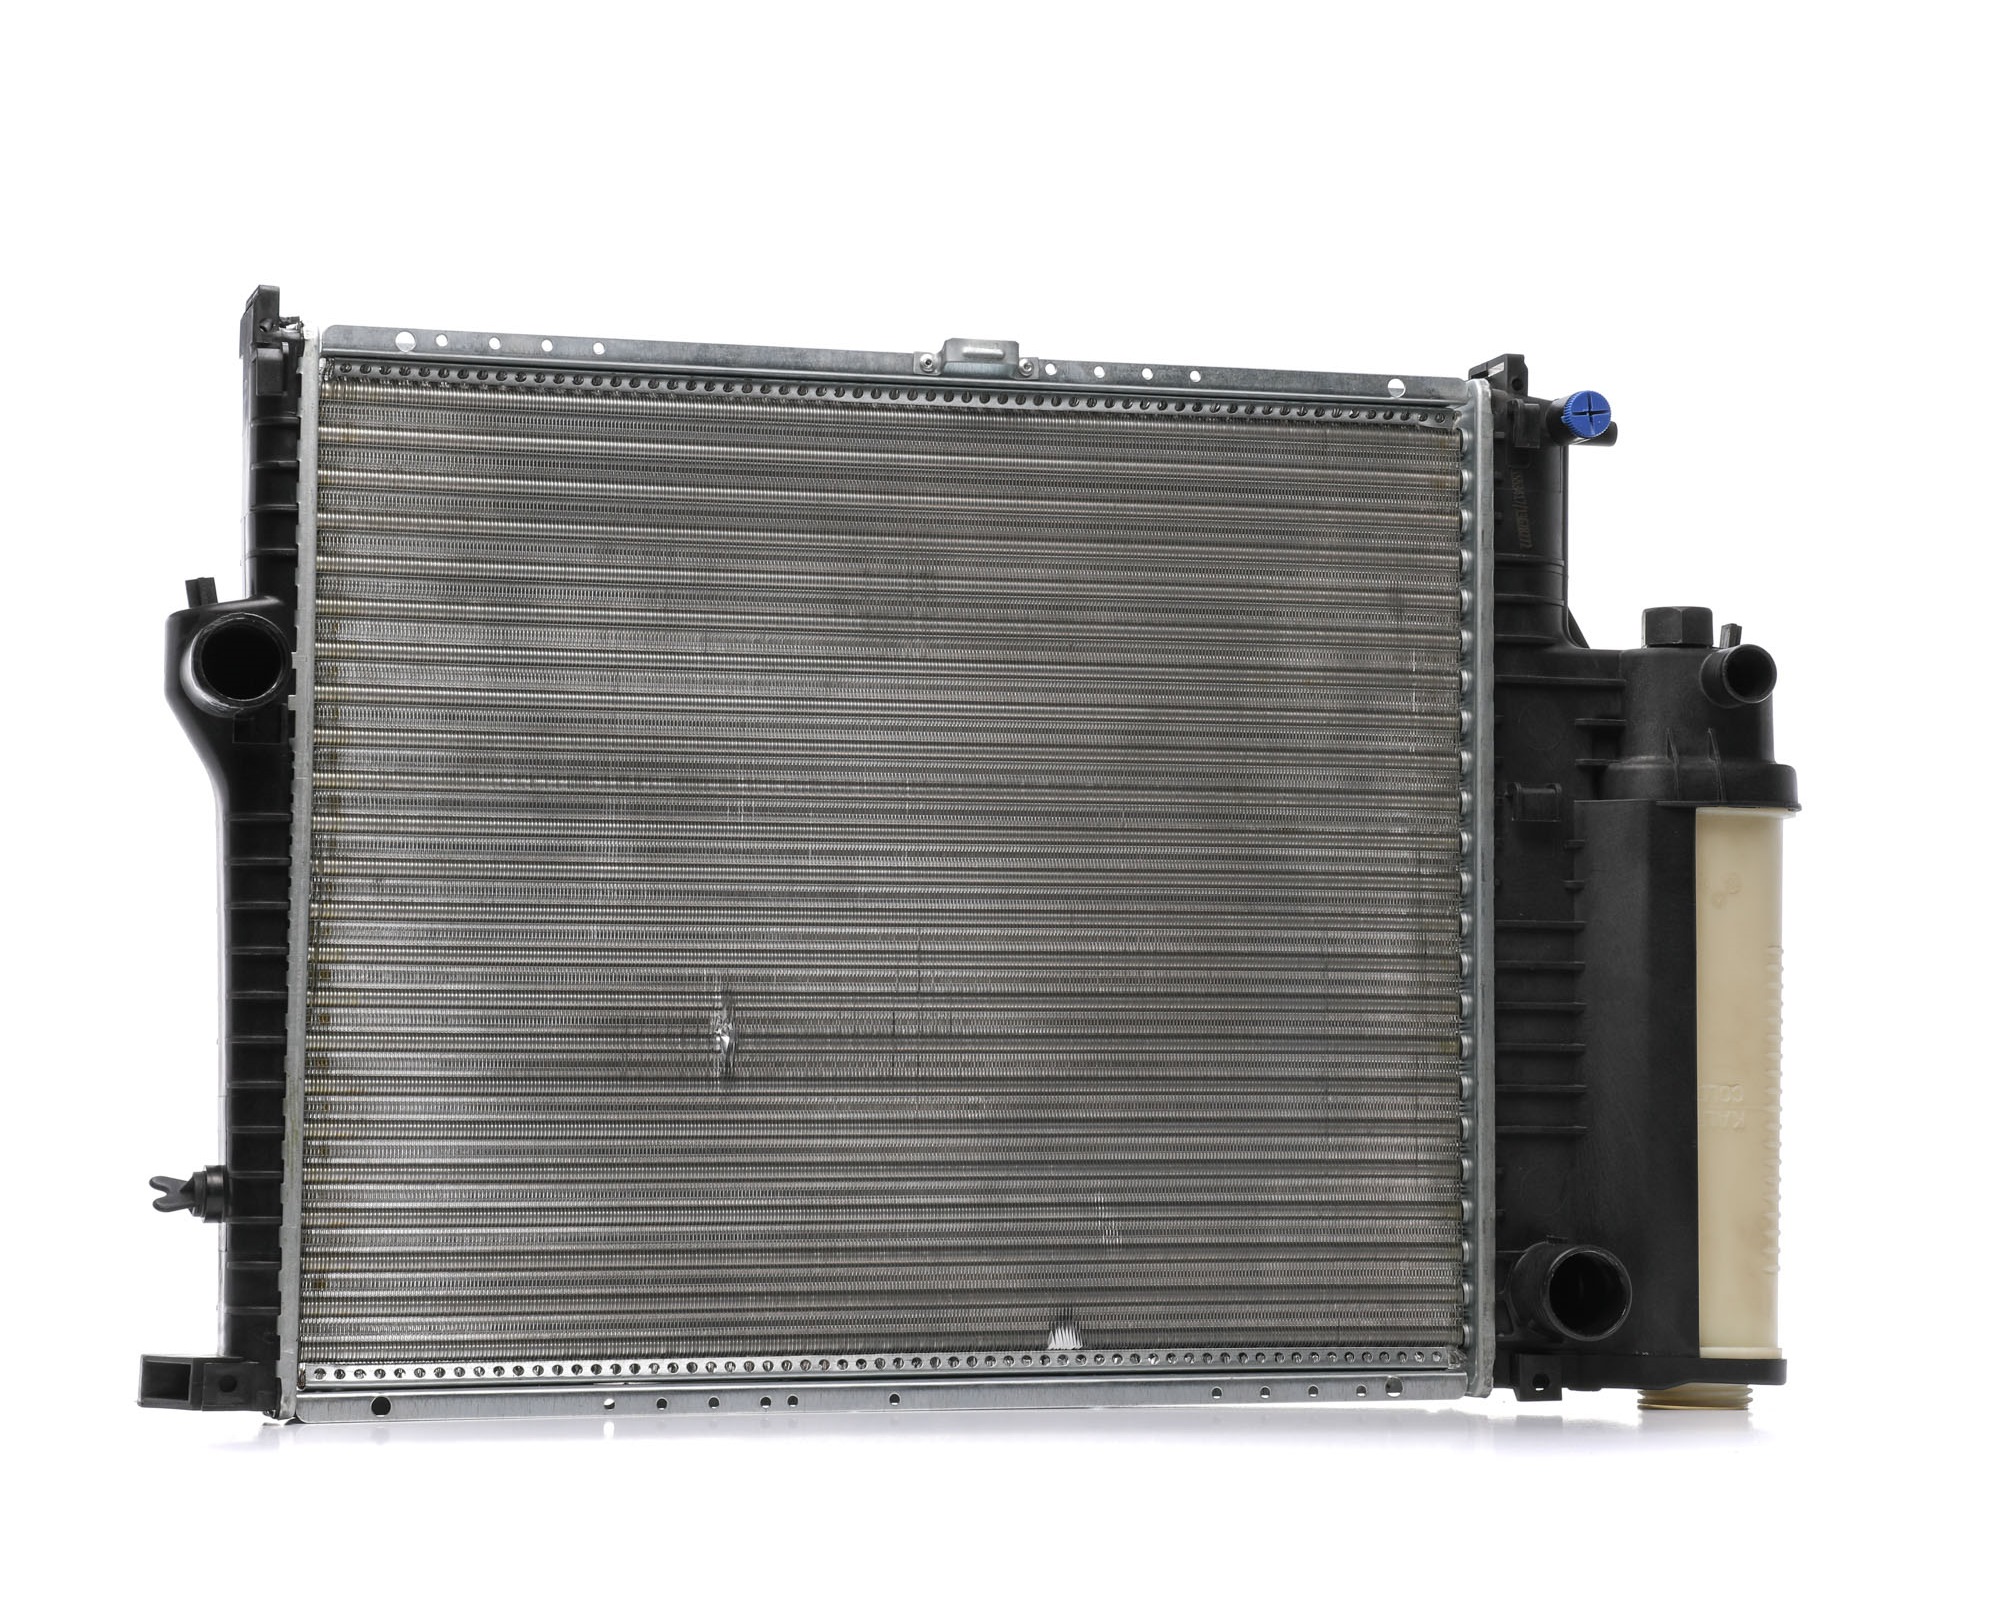 RIDEX 470R0451 Engine radiator for vehicles with/without air conditioning, 520 x 438 x 32 mm, Manual Transmission, Brazed cooling fins